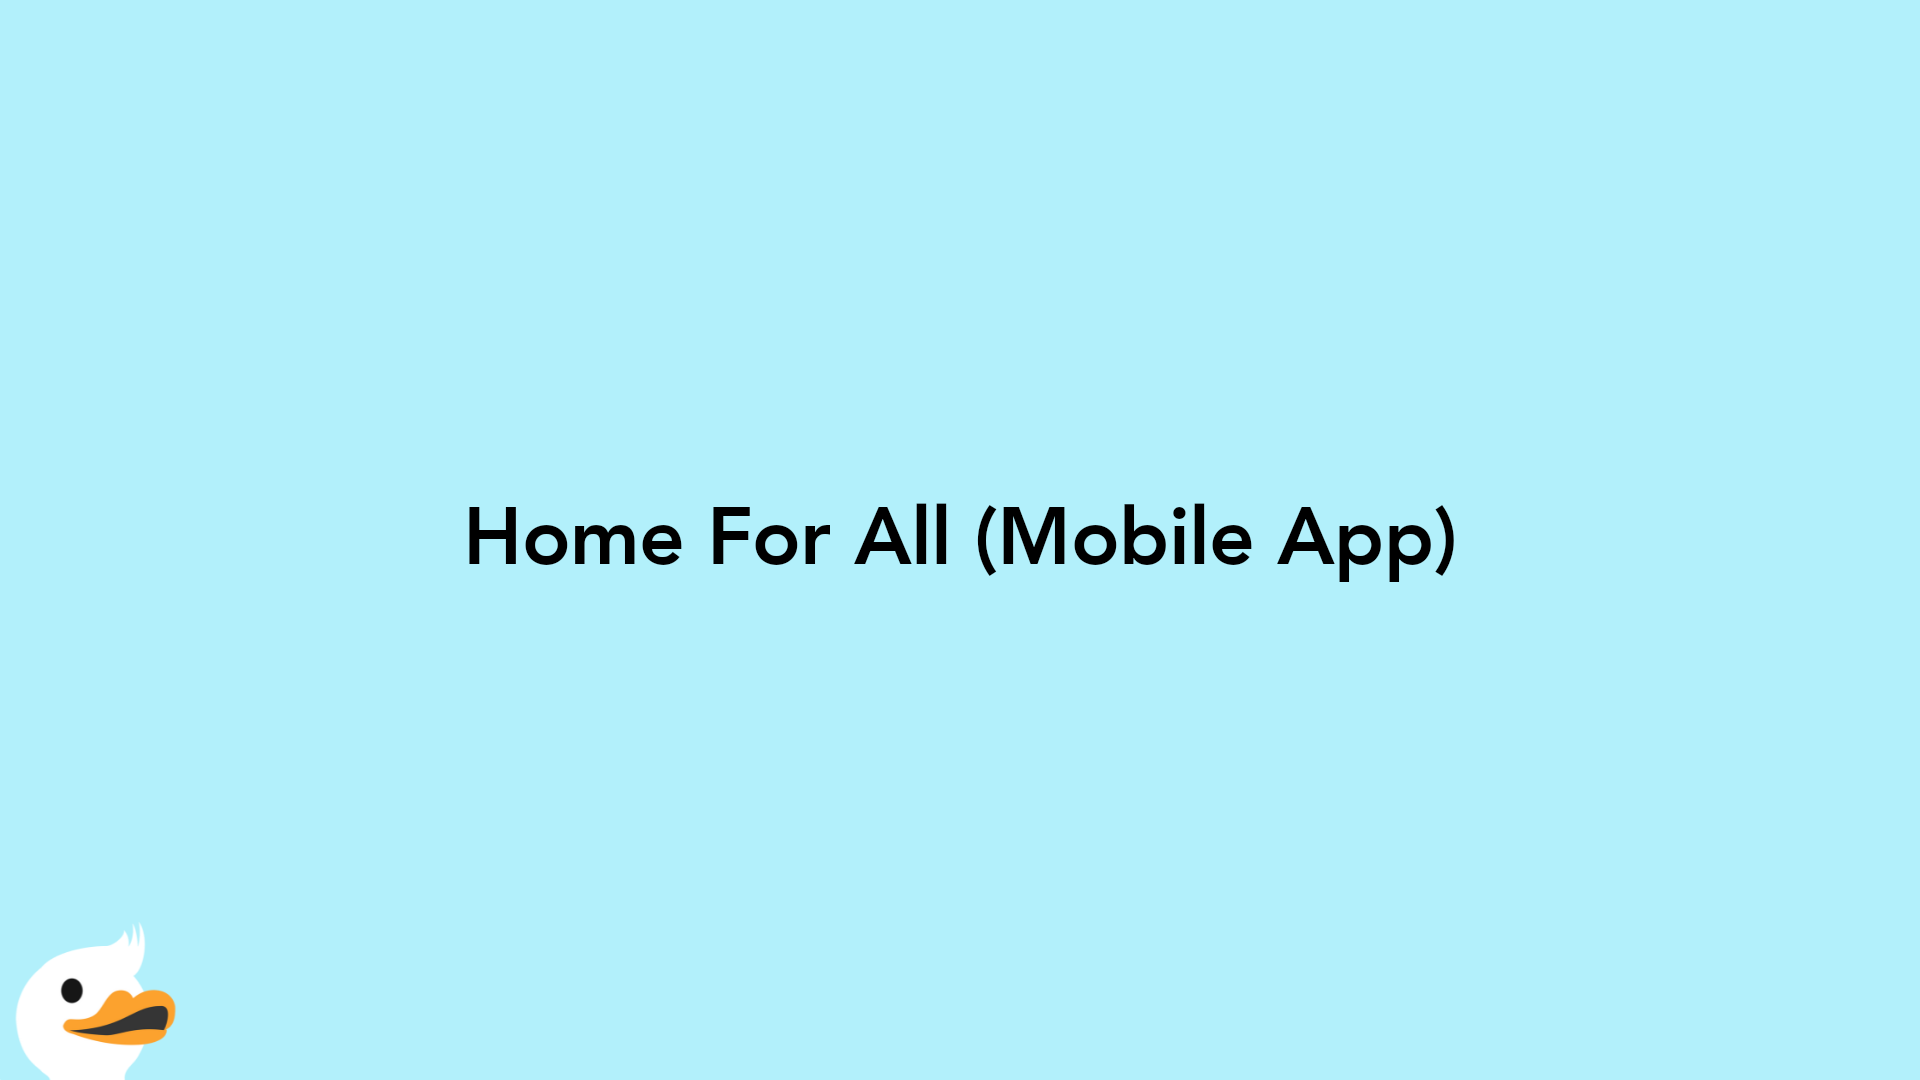 Home For All (Mobile App)